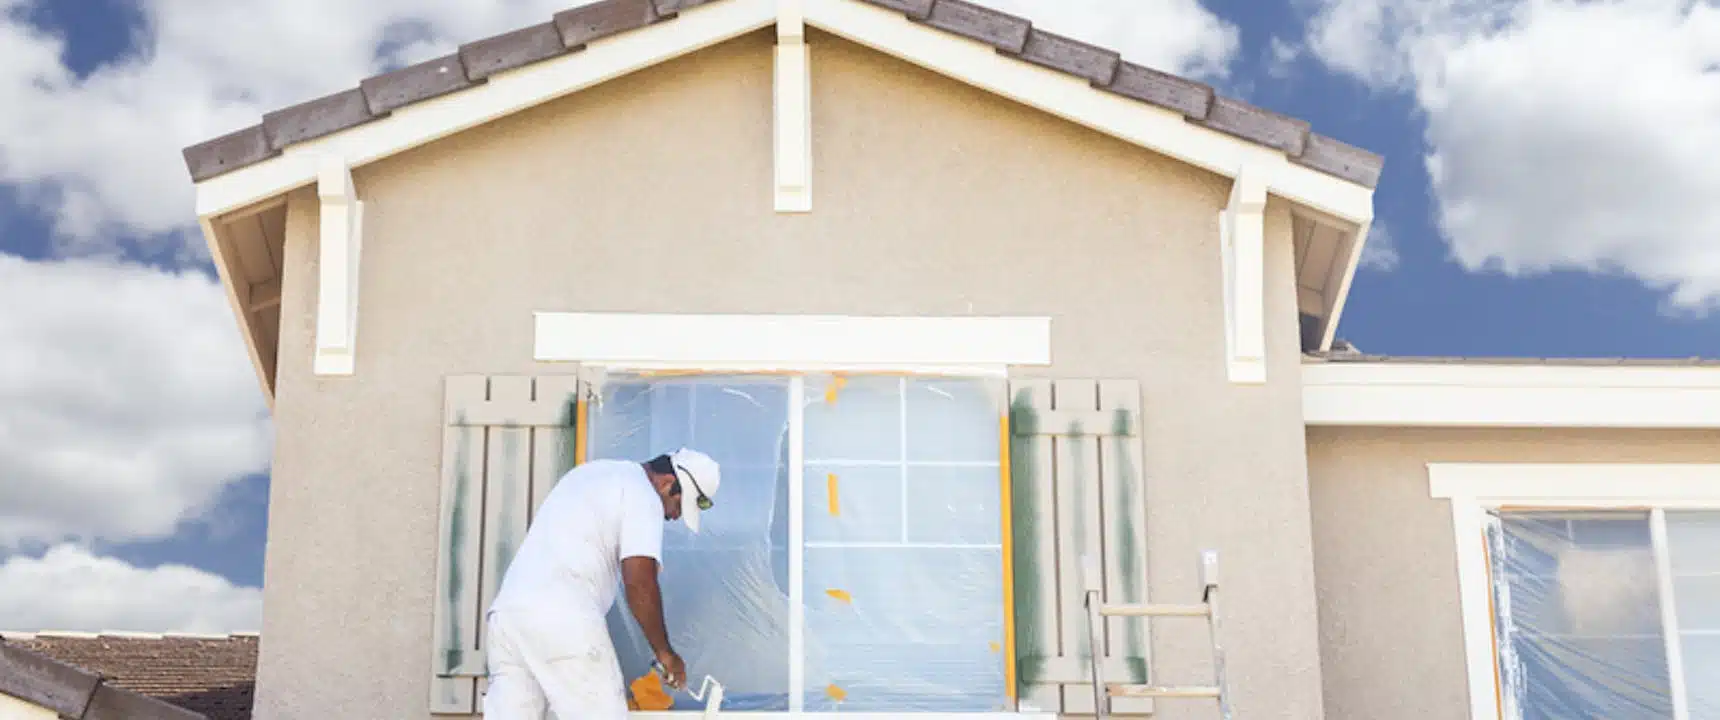 home exterior painting: Factors to Consider When Painting Your House